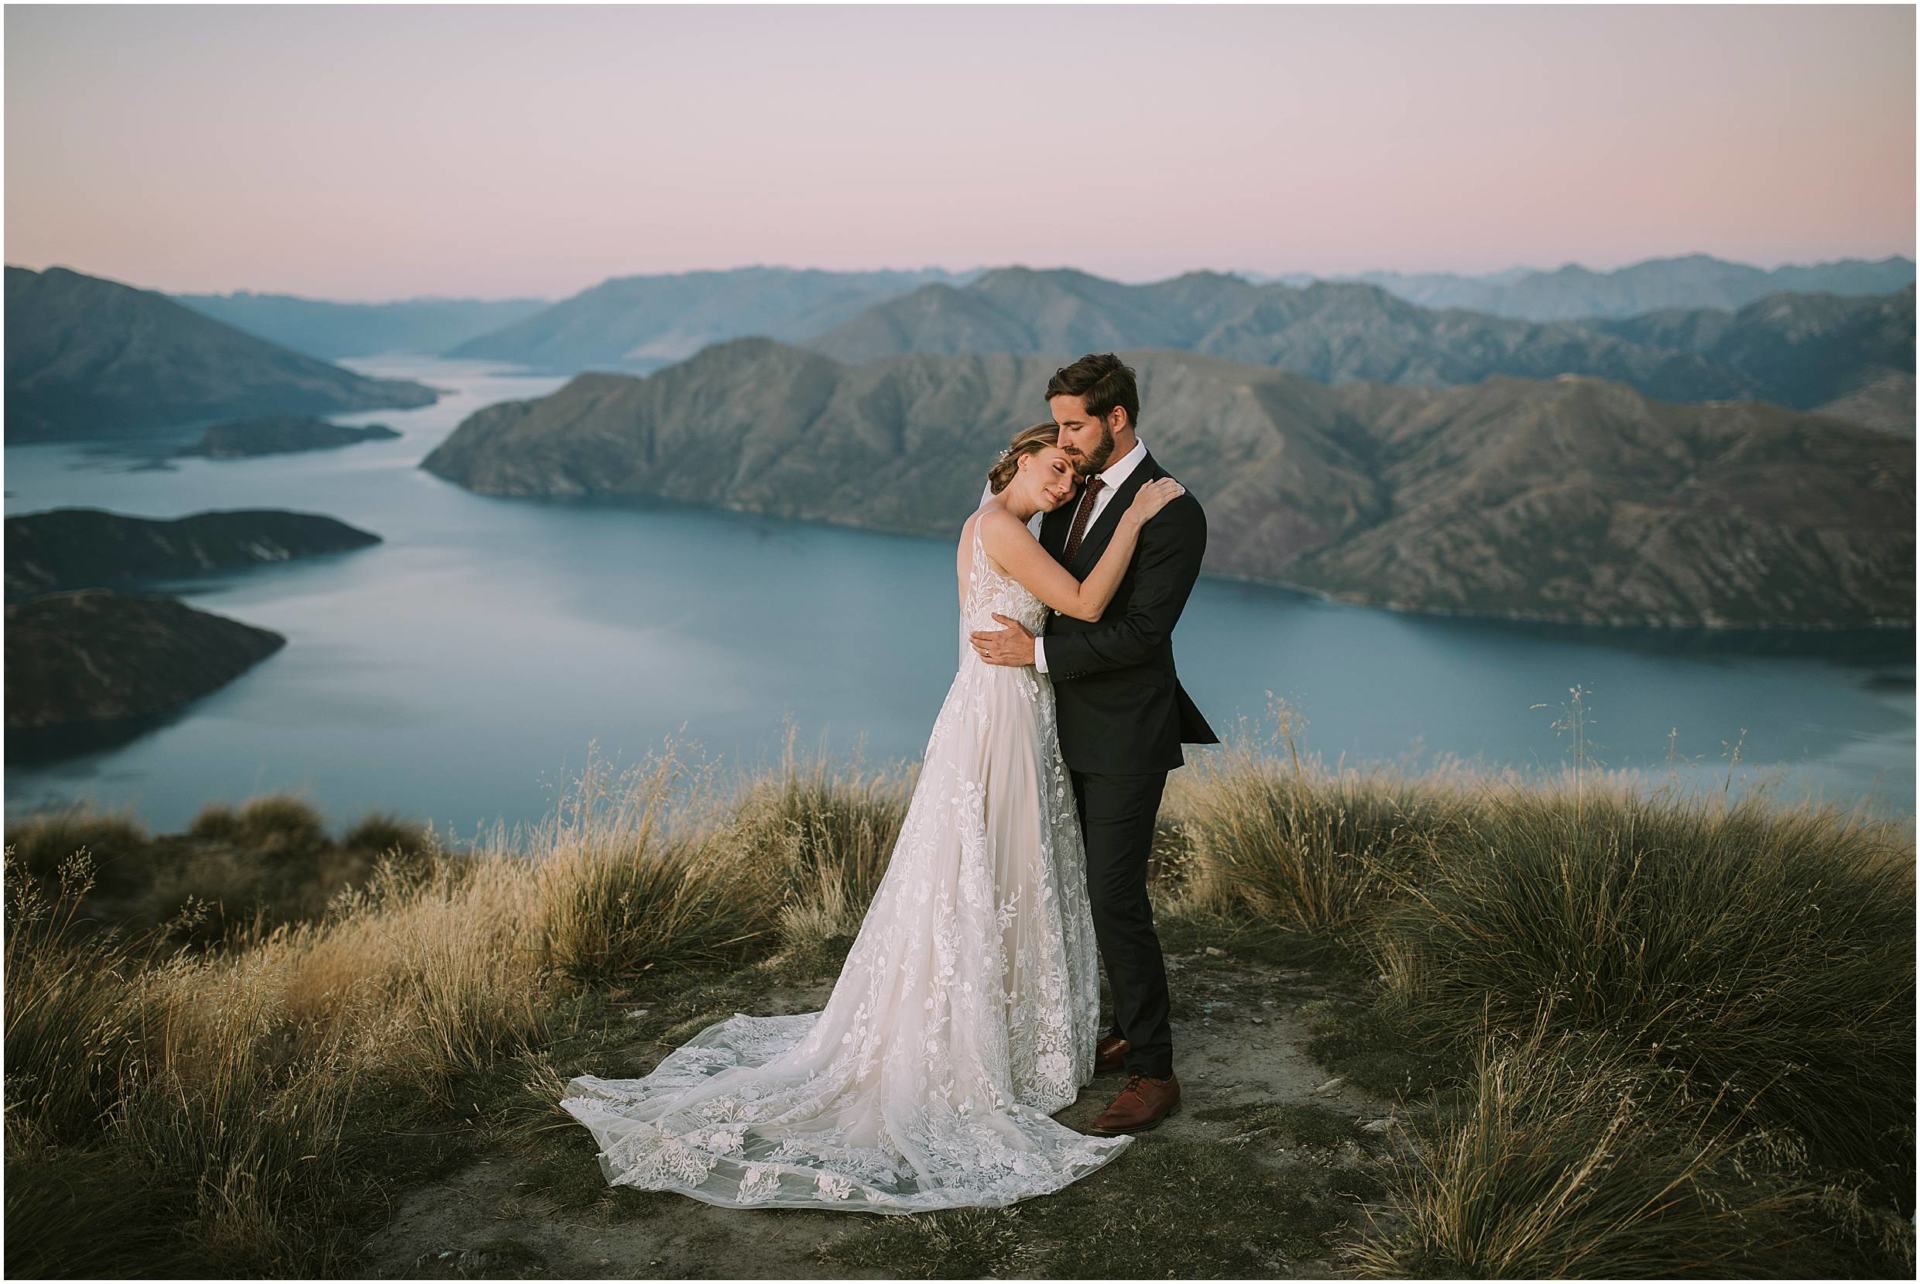 Charlotte Kiri Photography - Wedding Photography of a bride wearing a pretty long sheer lace dress with a low back, hugging her groom who wears a smart black suit, as they stand on the edge of a peak overlooking glacial lakes and mountains in Wanaka, New Zealand.